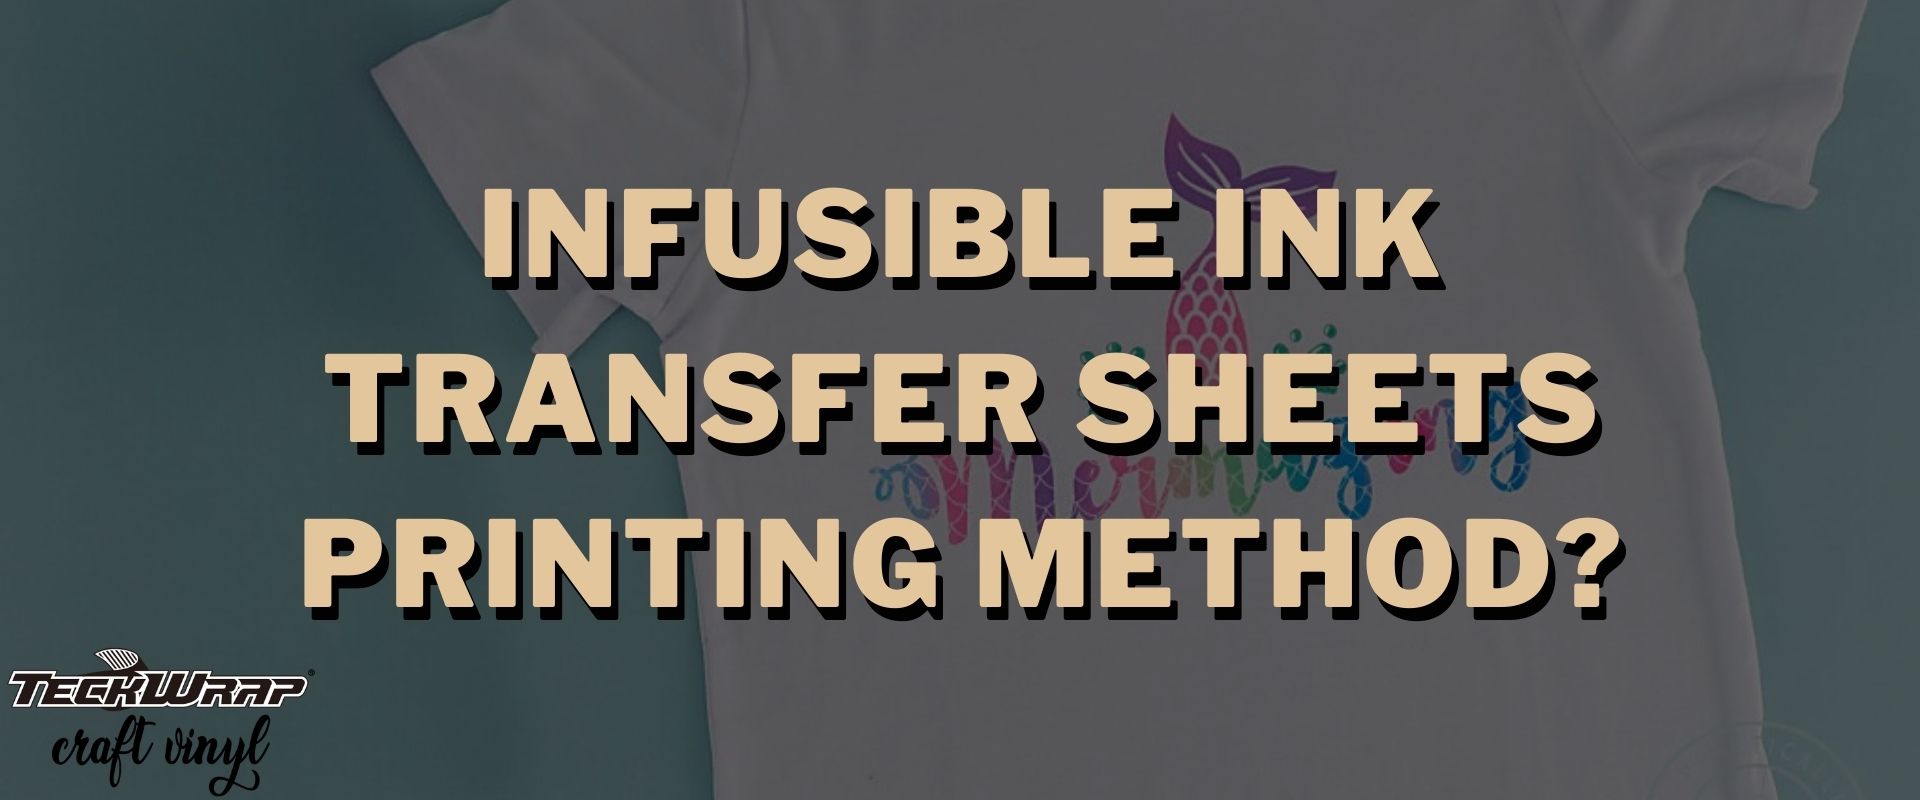 What Is Infusible Ink Transfer Sheets Printing Method?